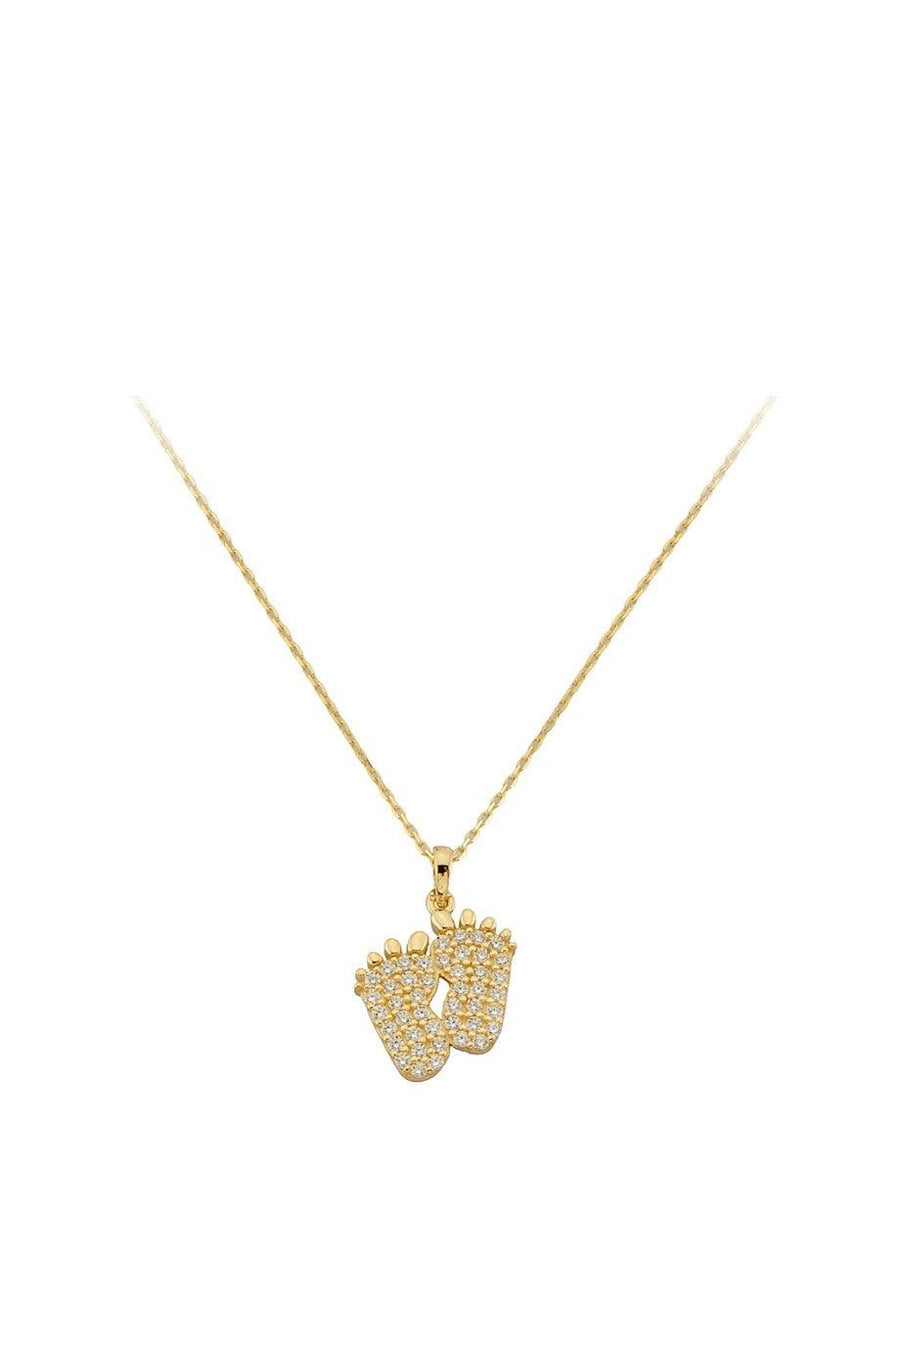 Gold Baby Footprint Necklace